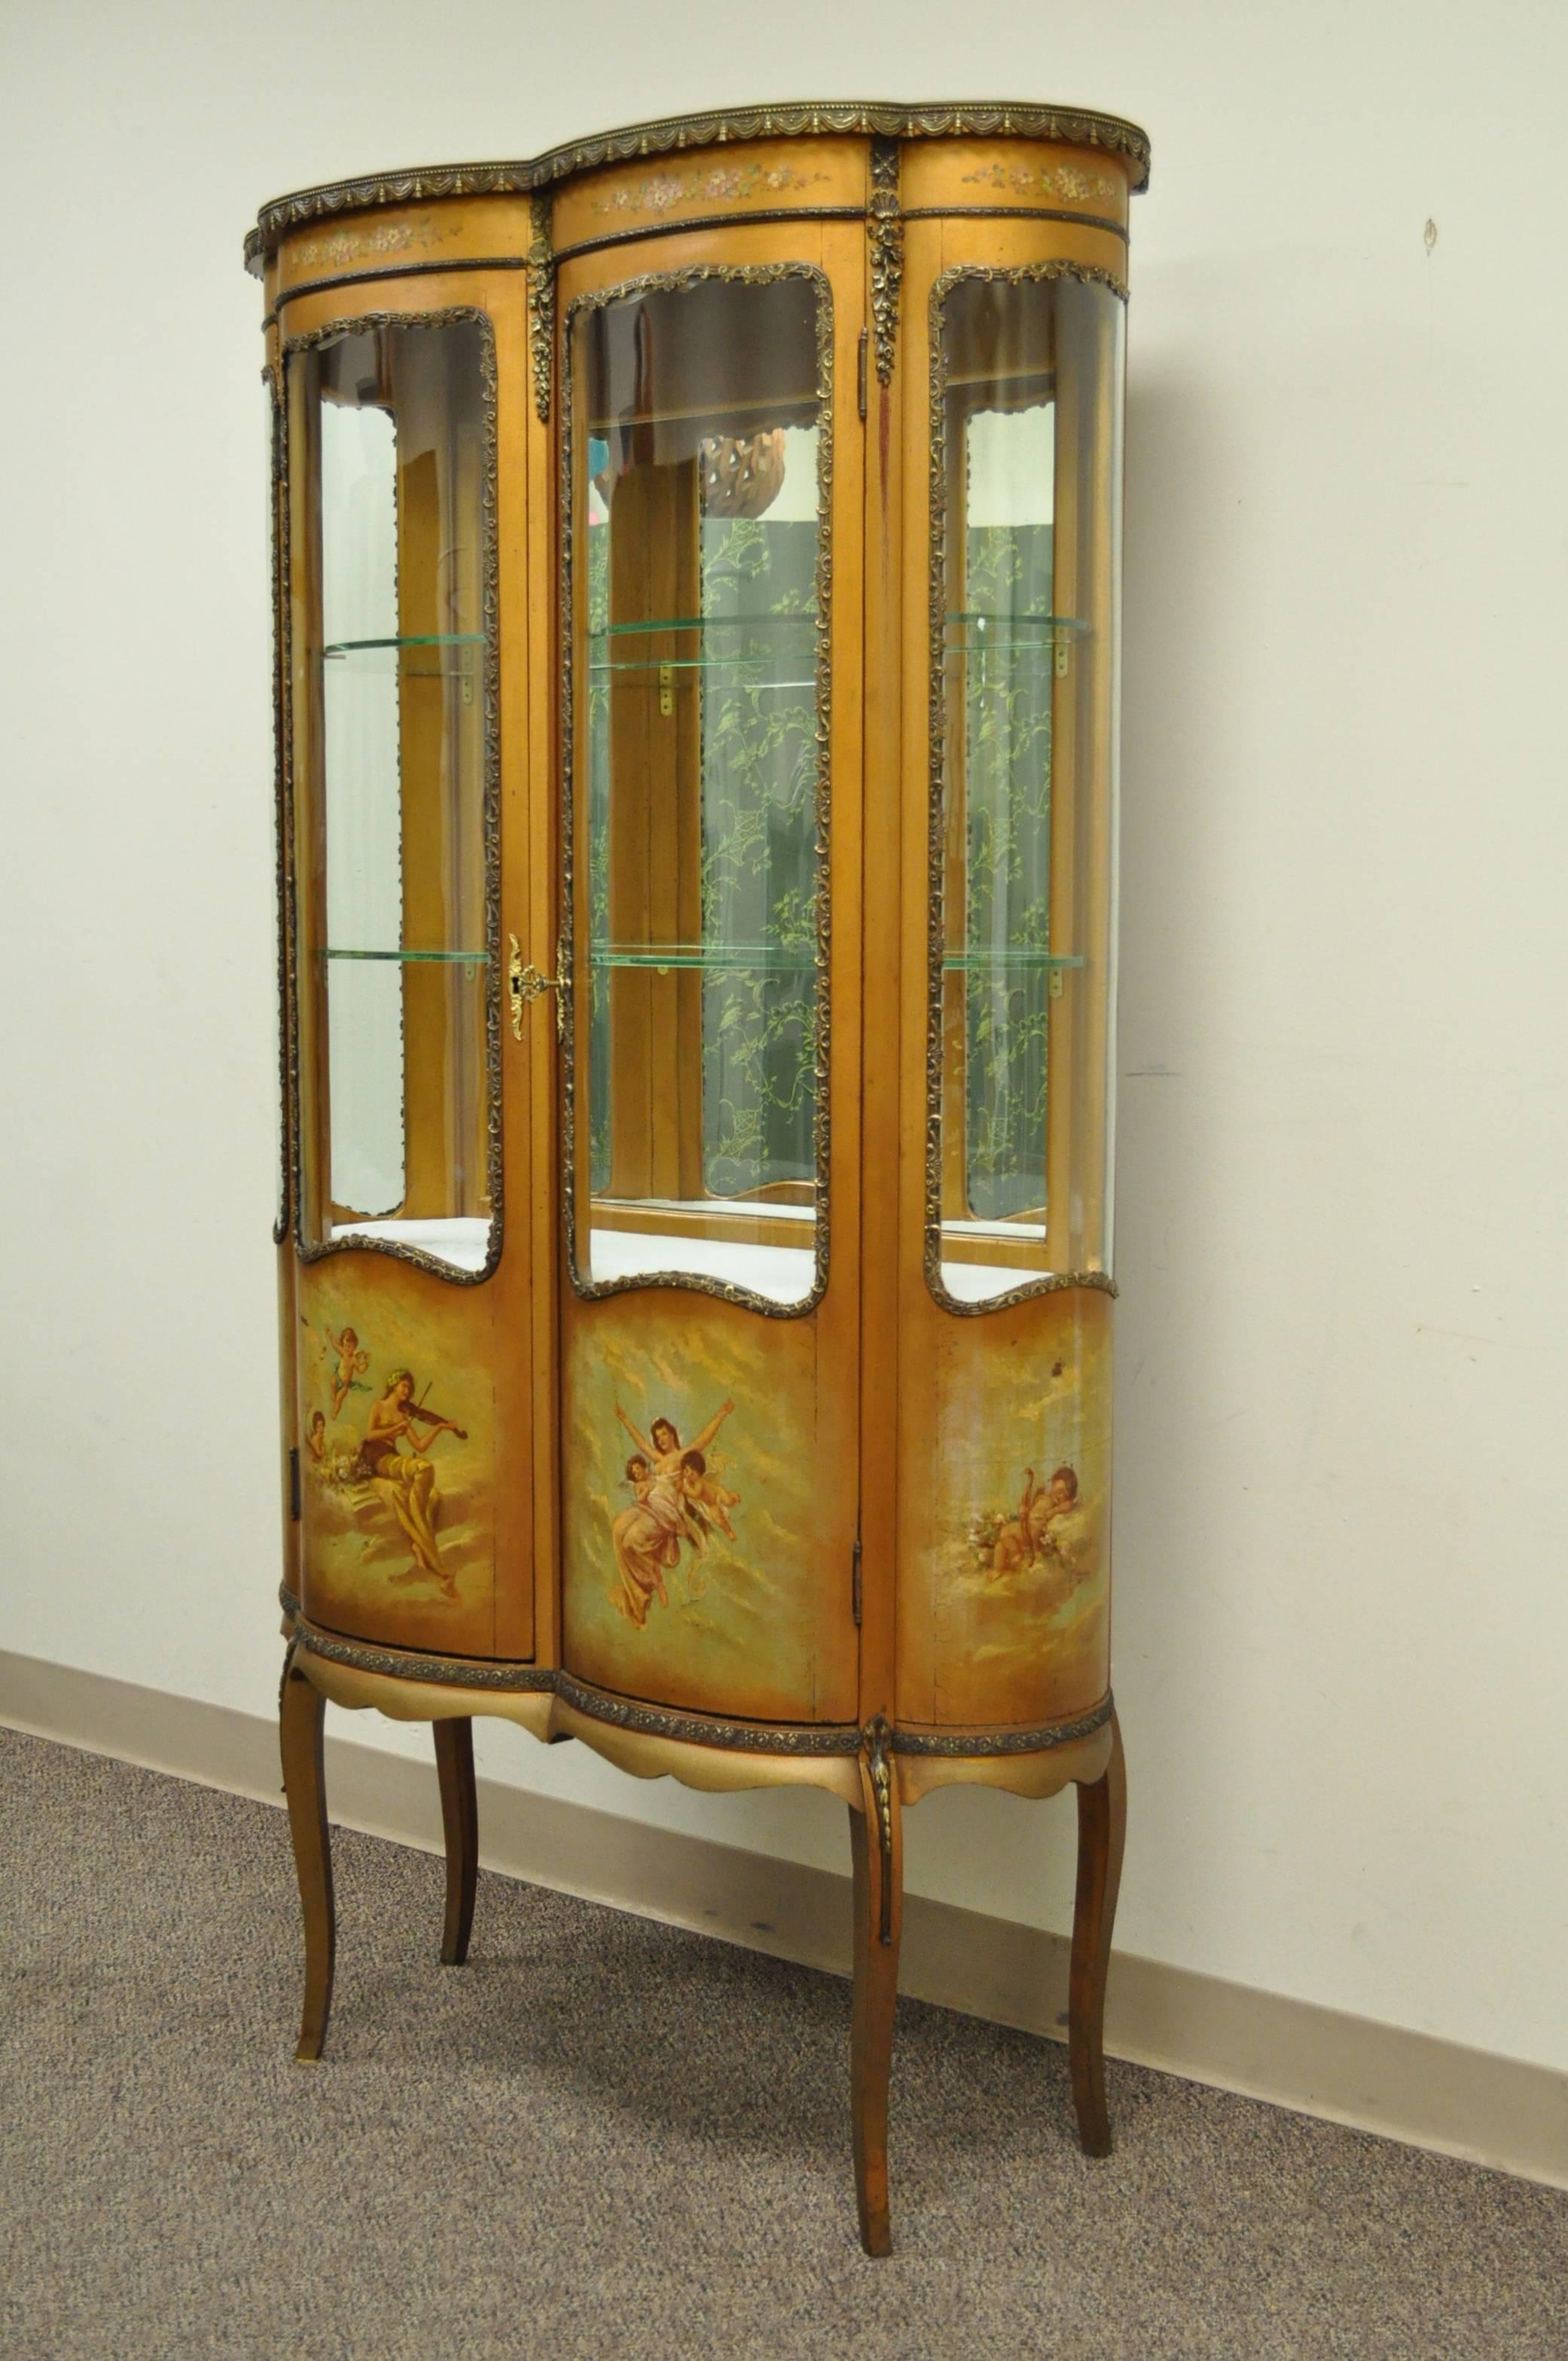 Stunning antique Louis XV style Vernis Martin display cabinet. The French cabinet features four curved glass panels, hand-painted details with angels and muses, intricate bronze-mounted ormolu, mirrored backing, lighted interior and a wonderful